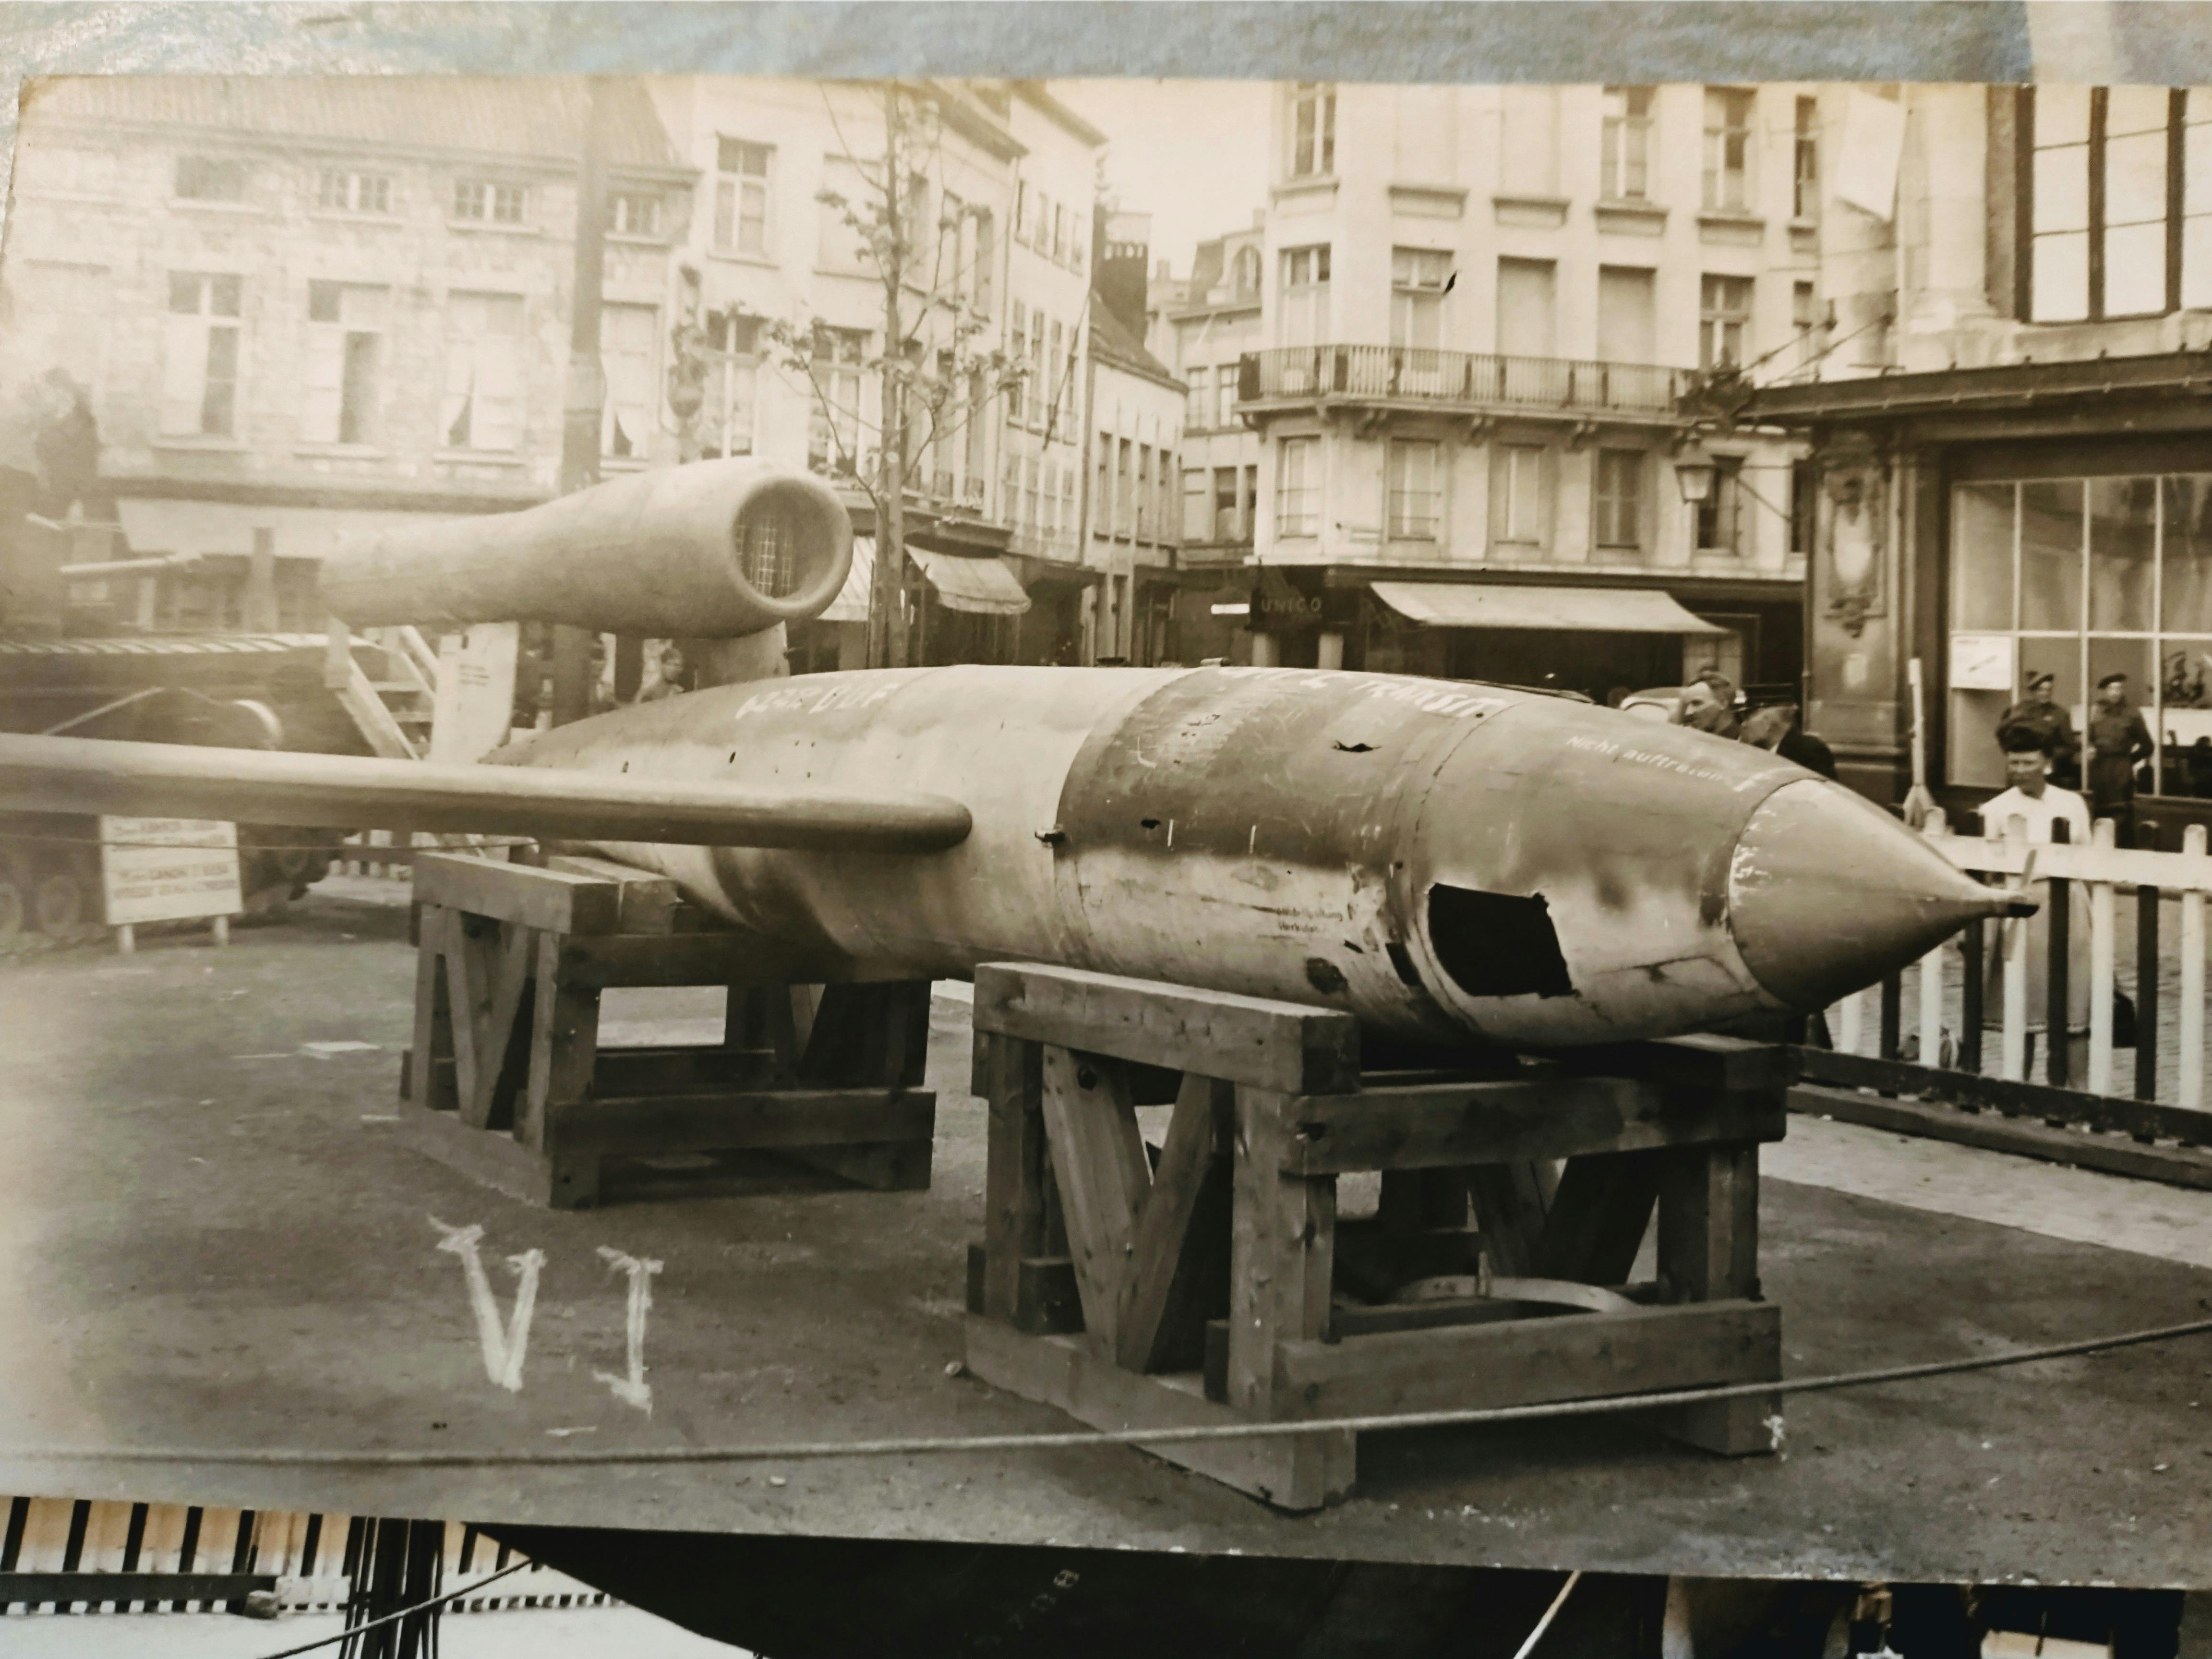 All about the V-1 “buzz bomb”: the world's first cruise missile